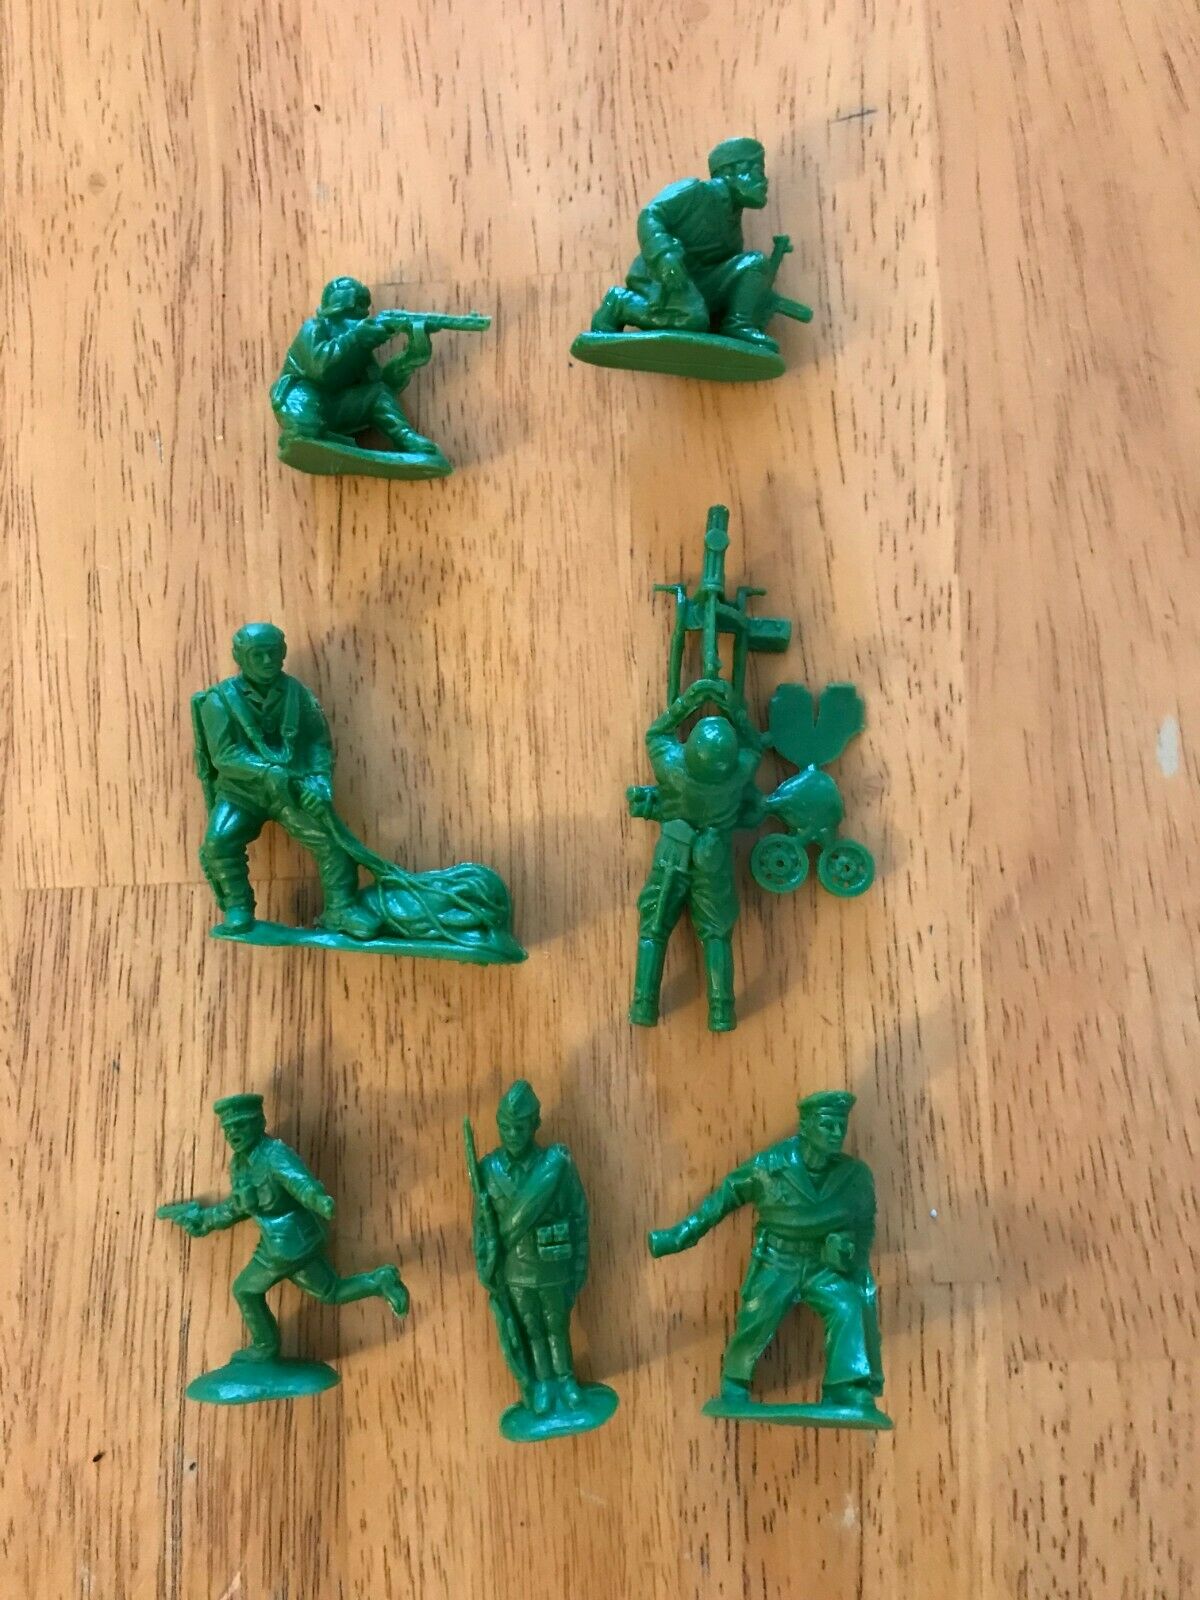 Unknown 1/35 scale recast WWII Russian soldiers - 7 figures